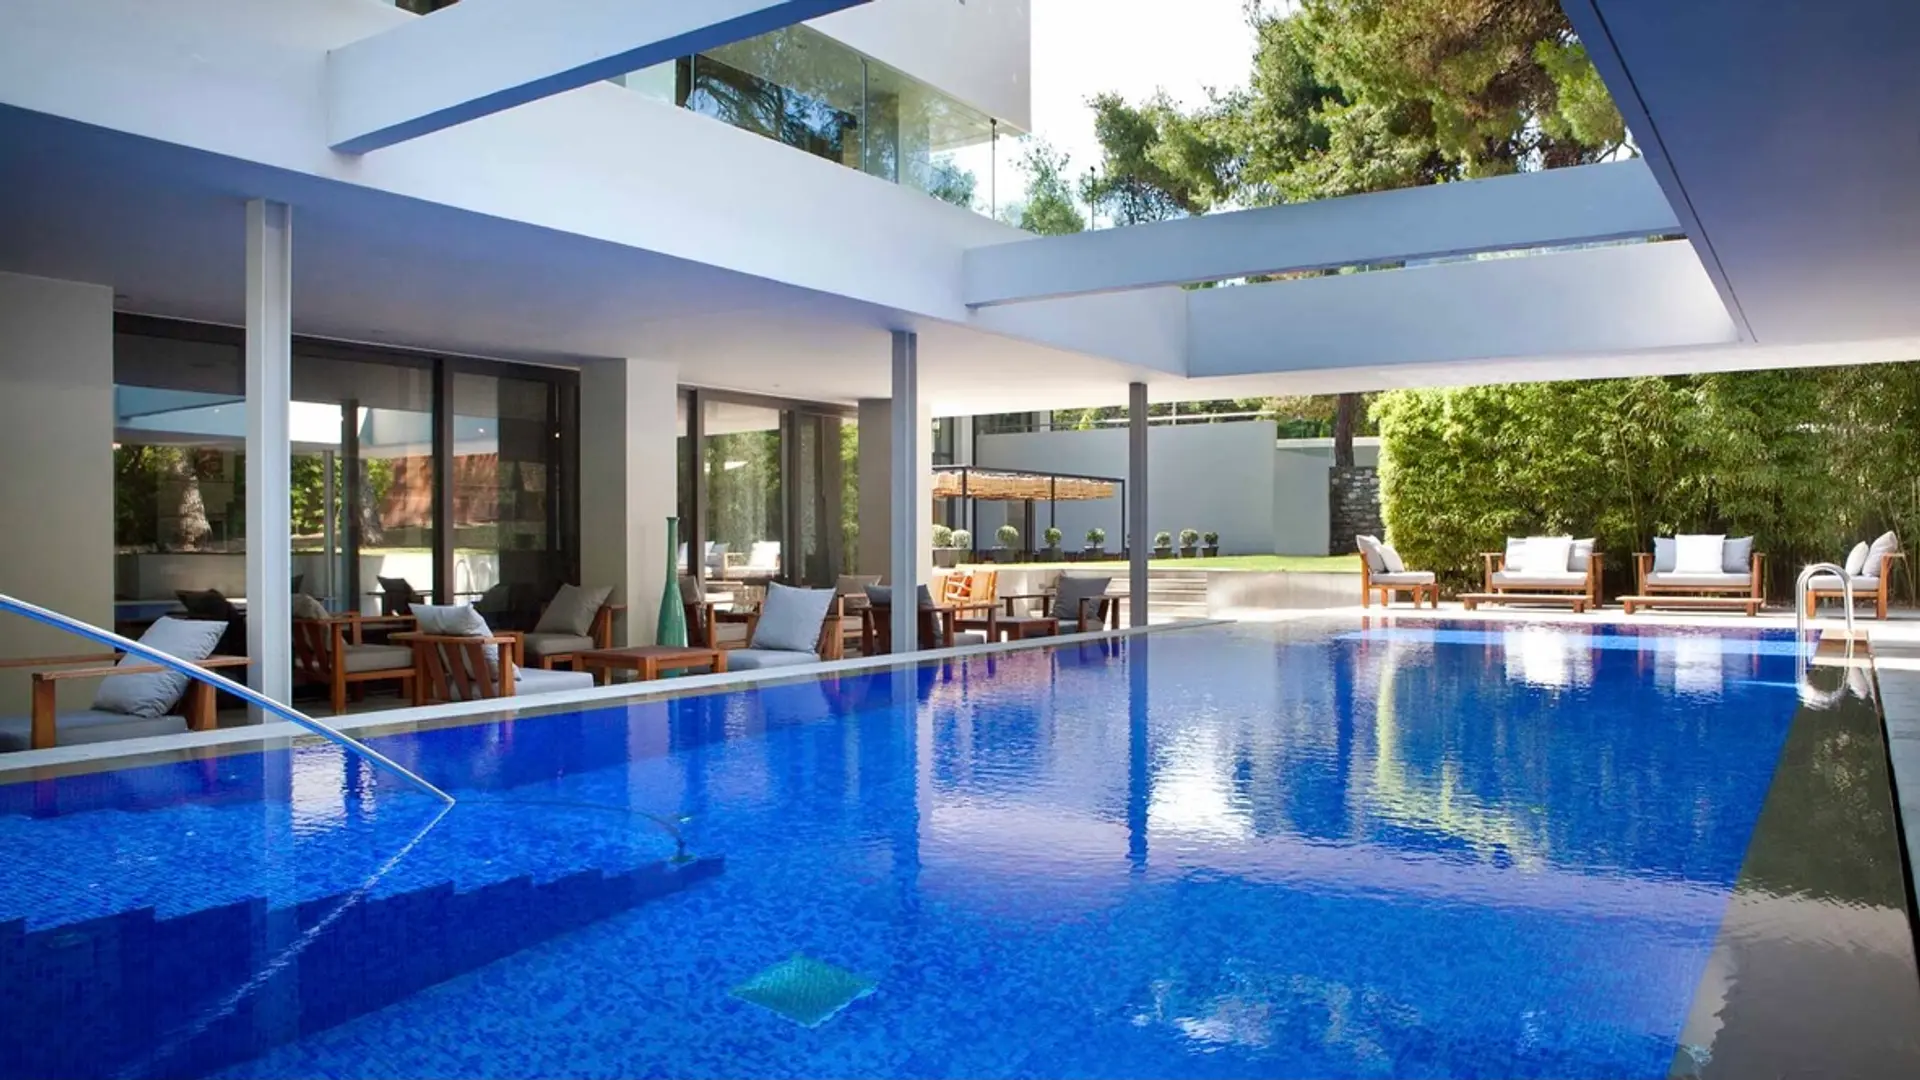 Pool area with open roof, white decor and sunbeds